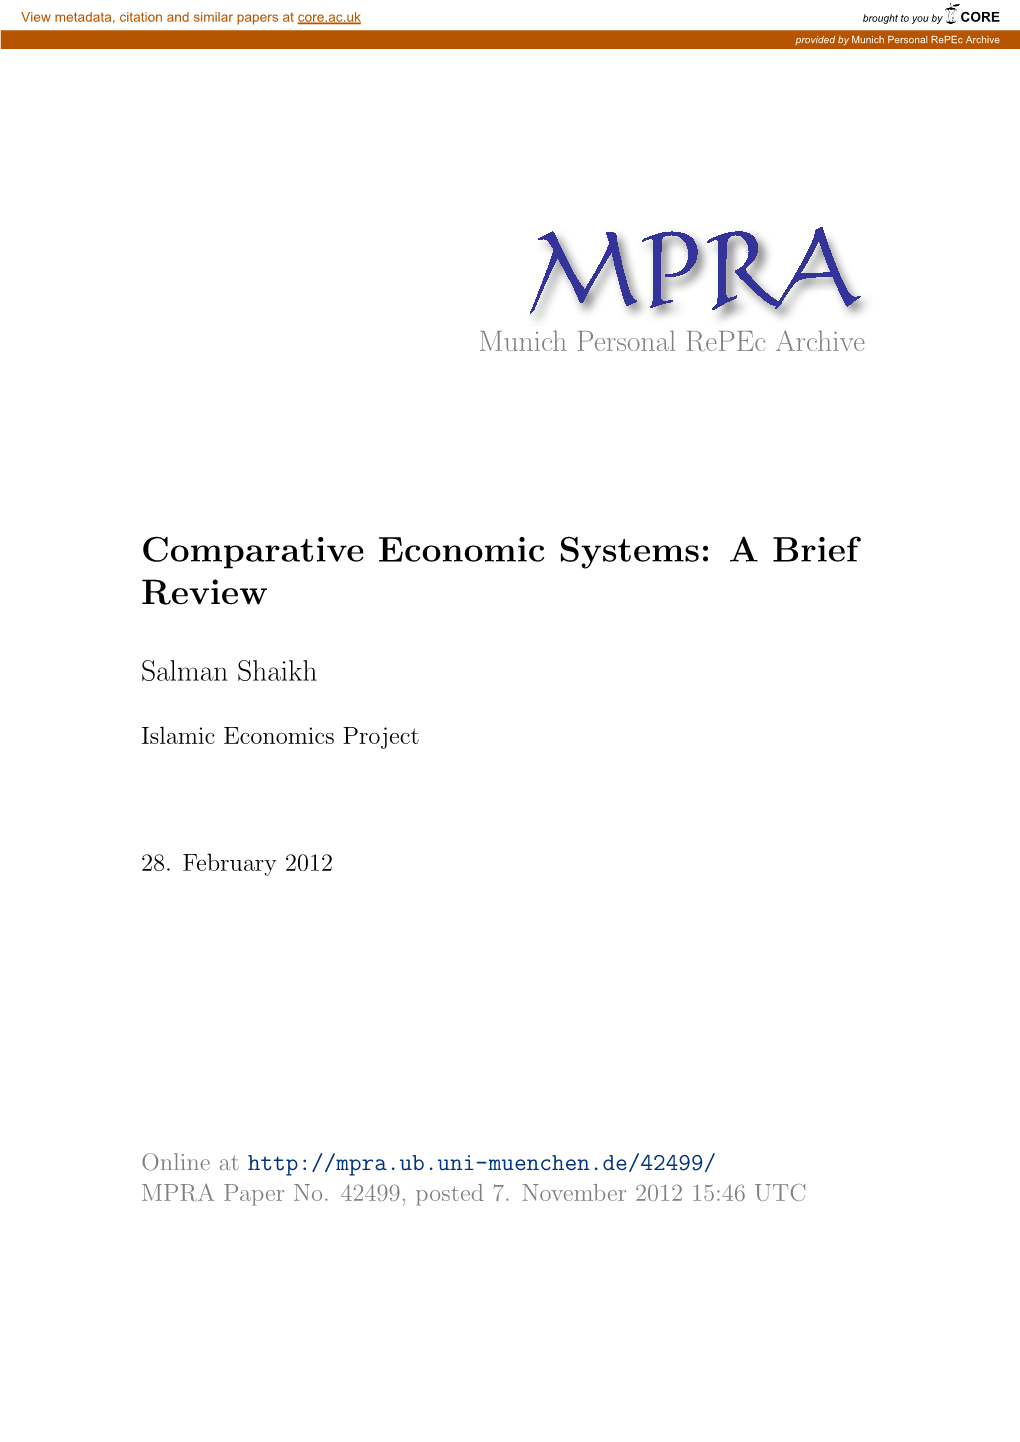 Comparative Economic Systems: a Brief Review